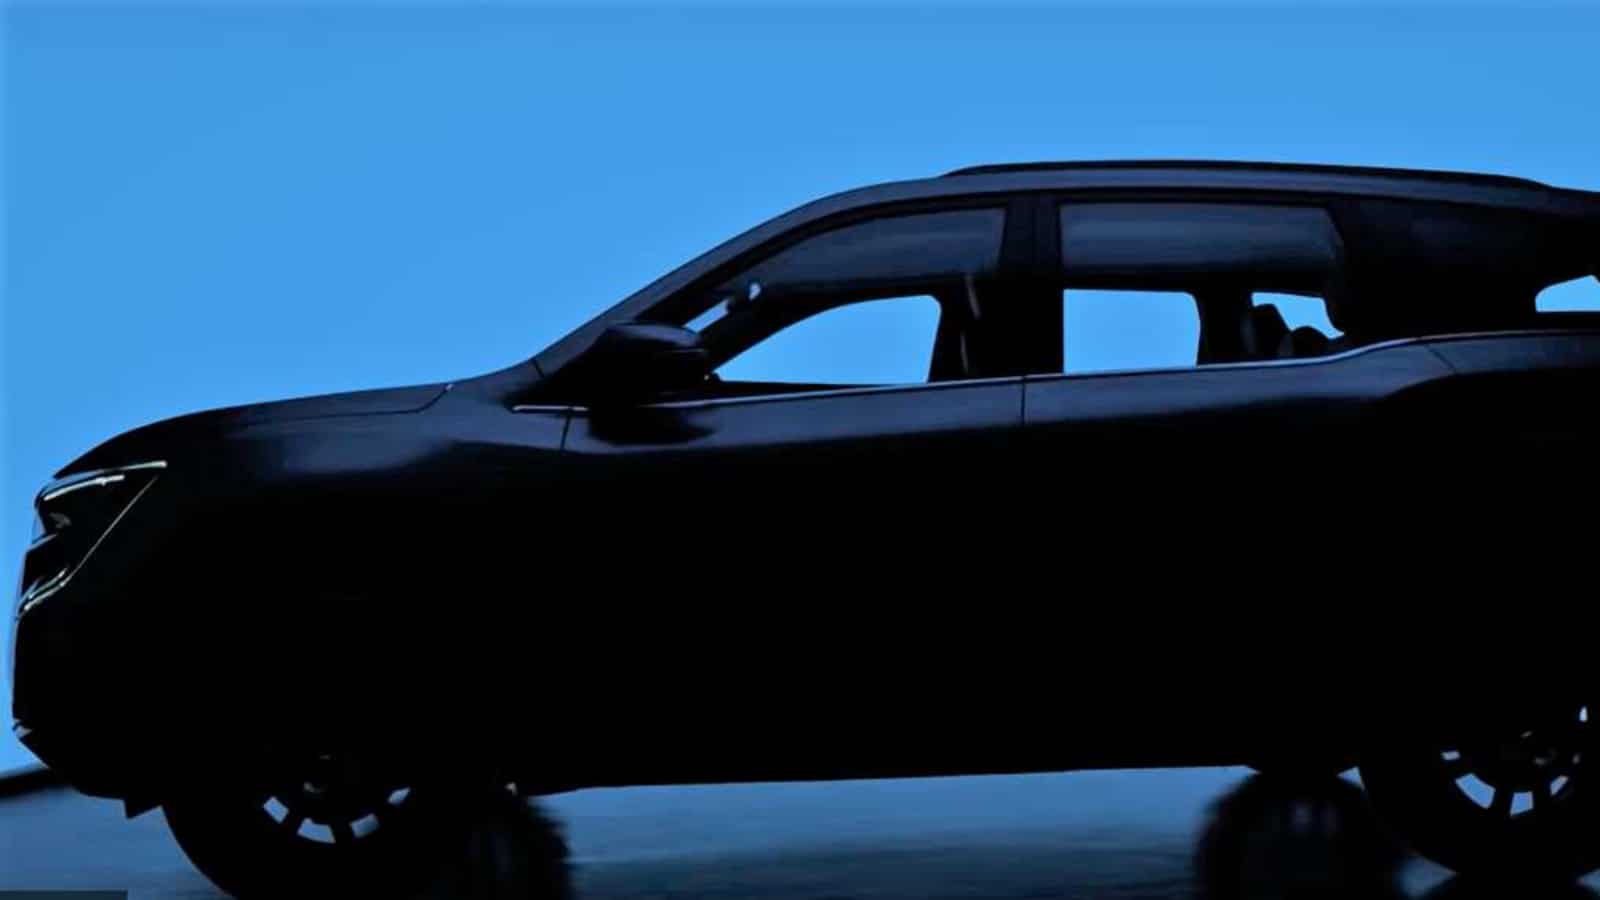 Mahindra XUV700 teaser video gives glimpse of new SUV. Watch here